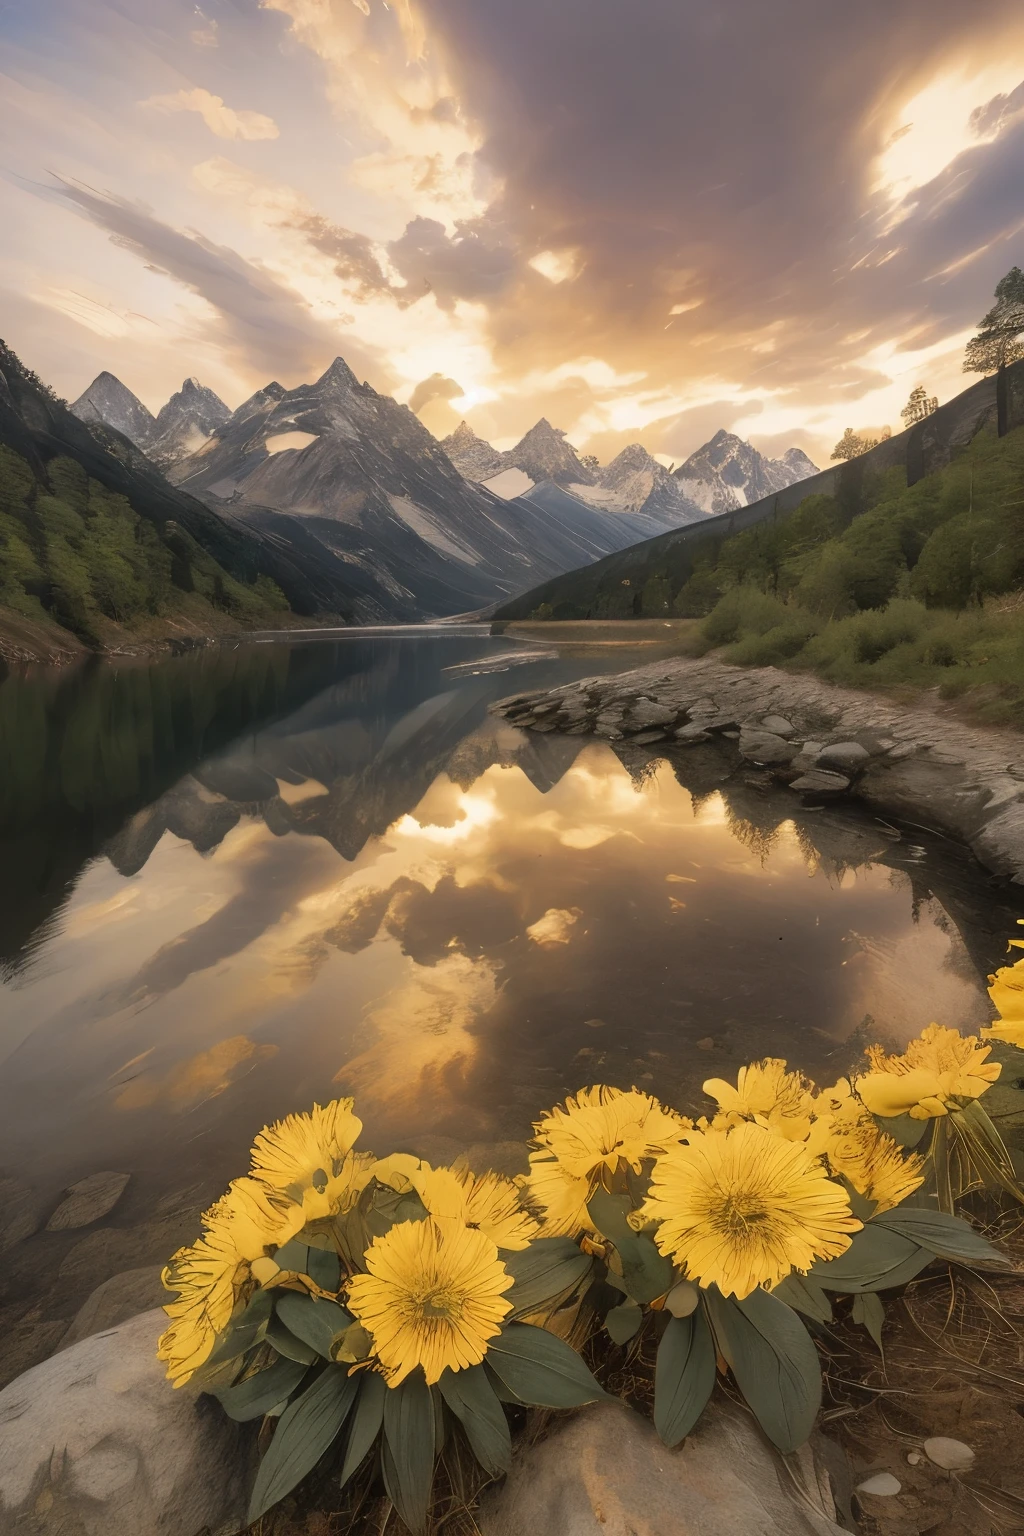 (best quality, 8K, highres, masterpiece:1.2), stunning sunset over majestic mountains, crystal clear lake reflecting the vibrant colors, blooming flowers in the foreground, capturing the essence of nature's beauty, extreme depth and perspective, every detail meticulously captured, reminiscent of National Geographic photography, HDR lighting to enhance the atmosphere, vibrant and vivid colors, bringing the scene to life, a breathtaking masterpiece that has won numerous awards.